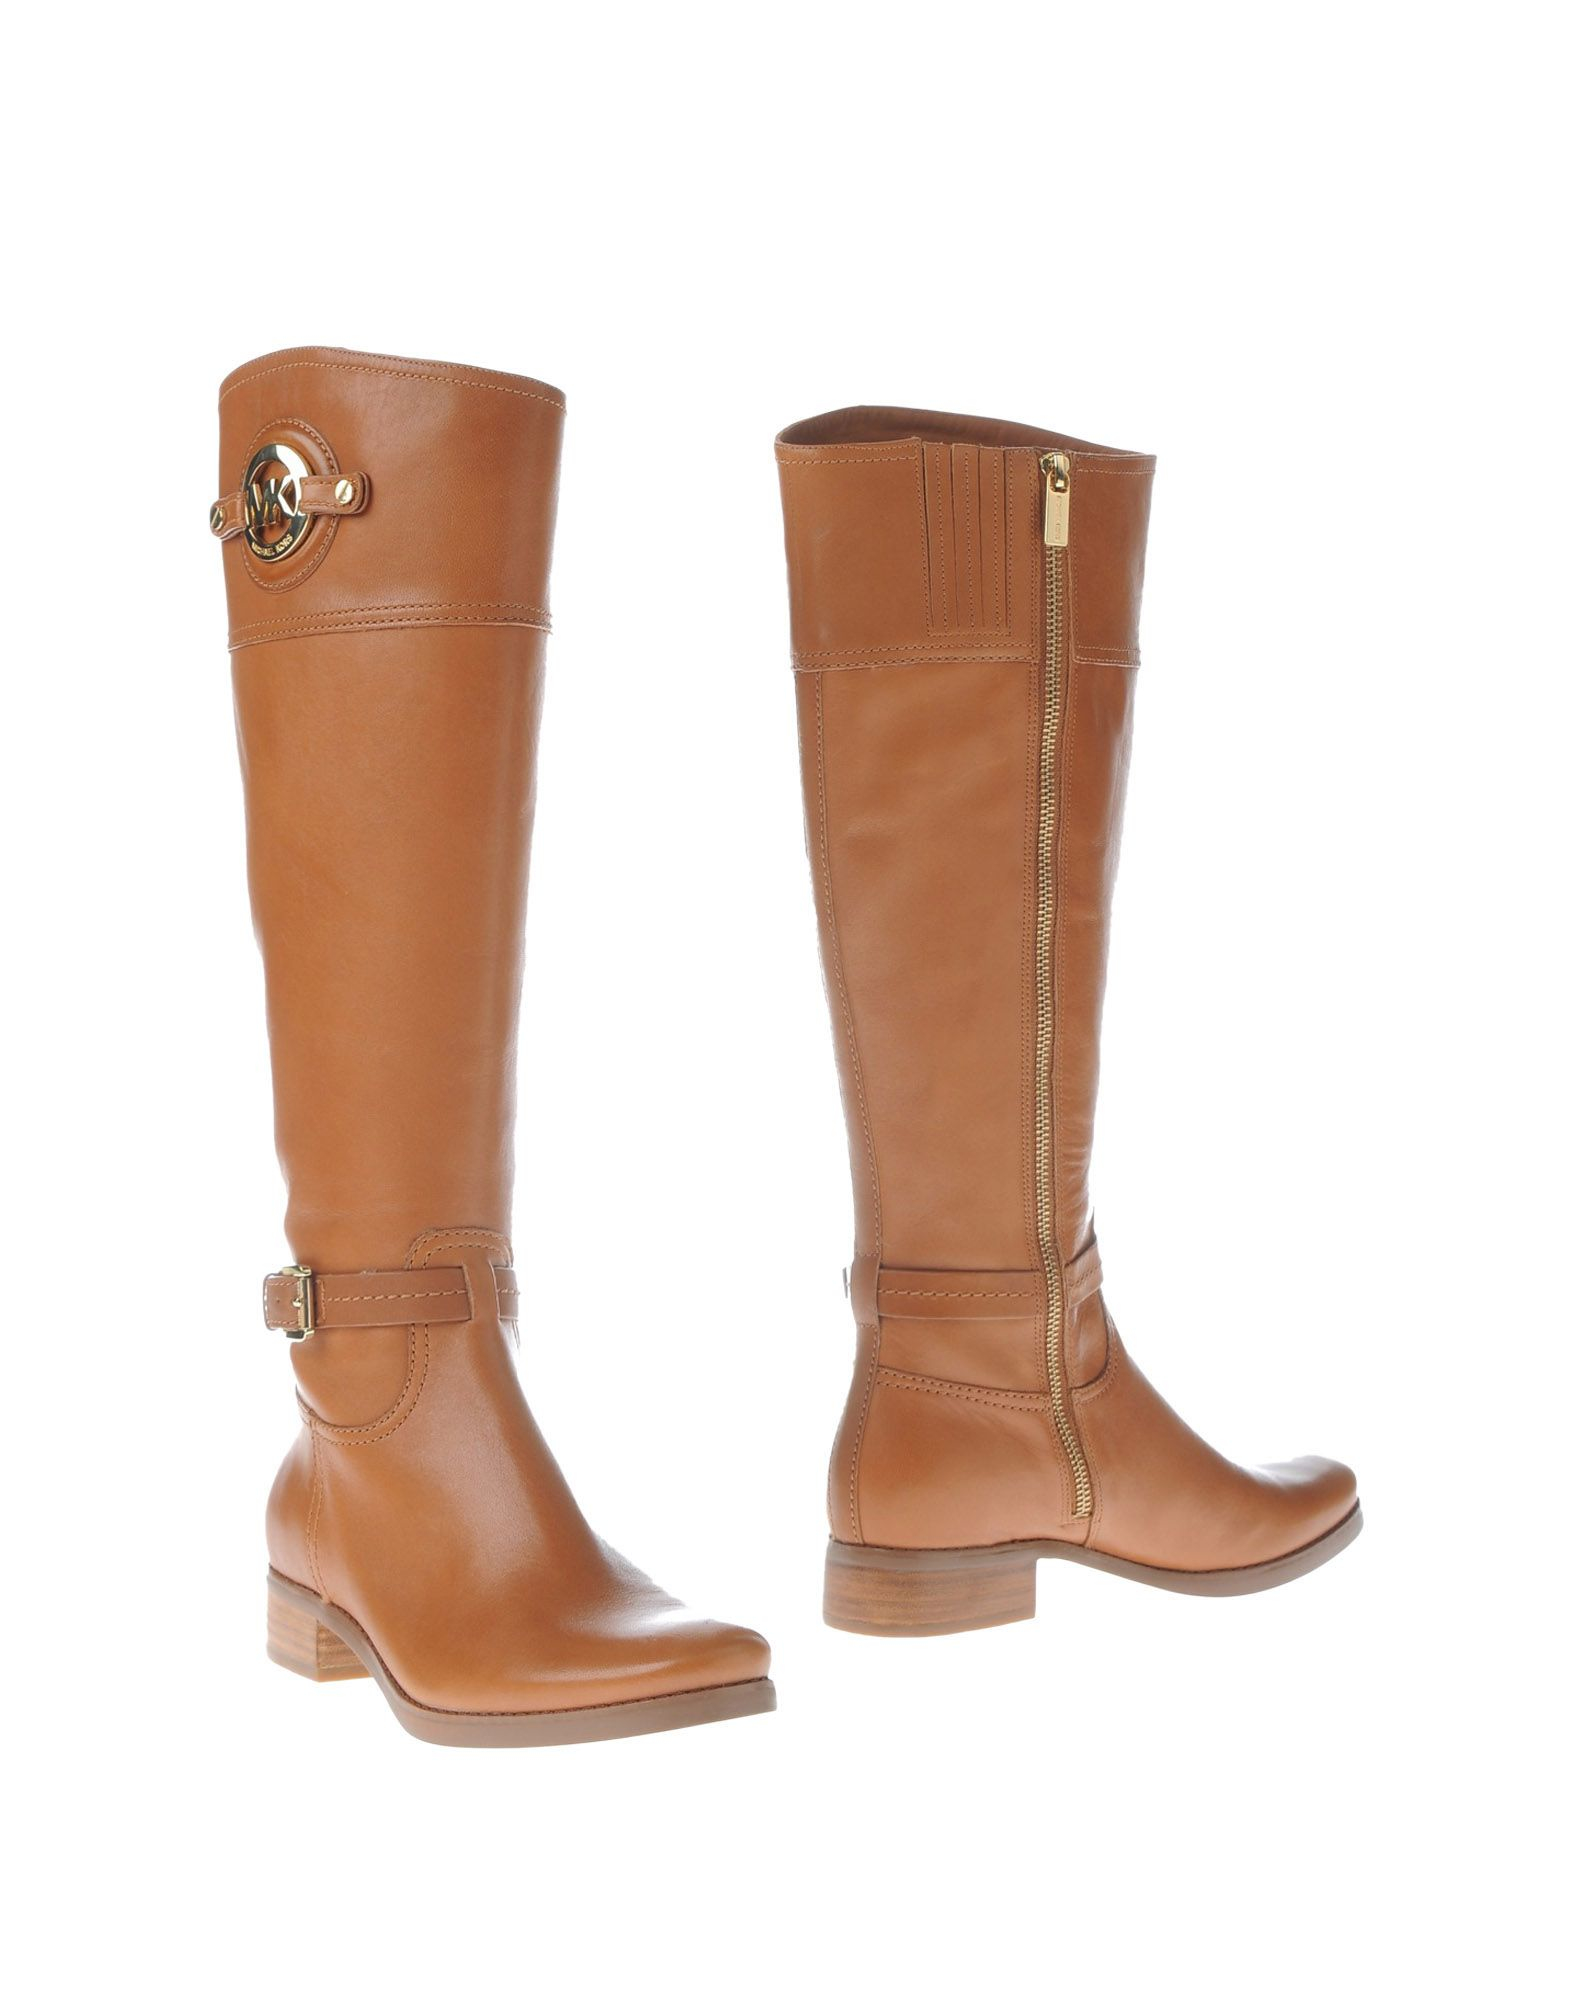 MICHAEL Michael Kors Leather Boots in Tan (Brown) - Lyst